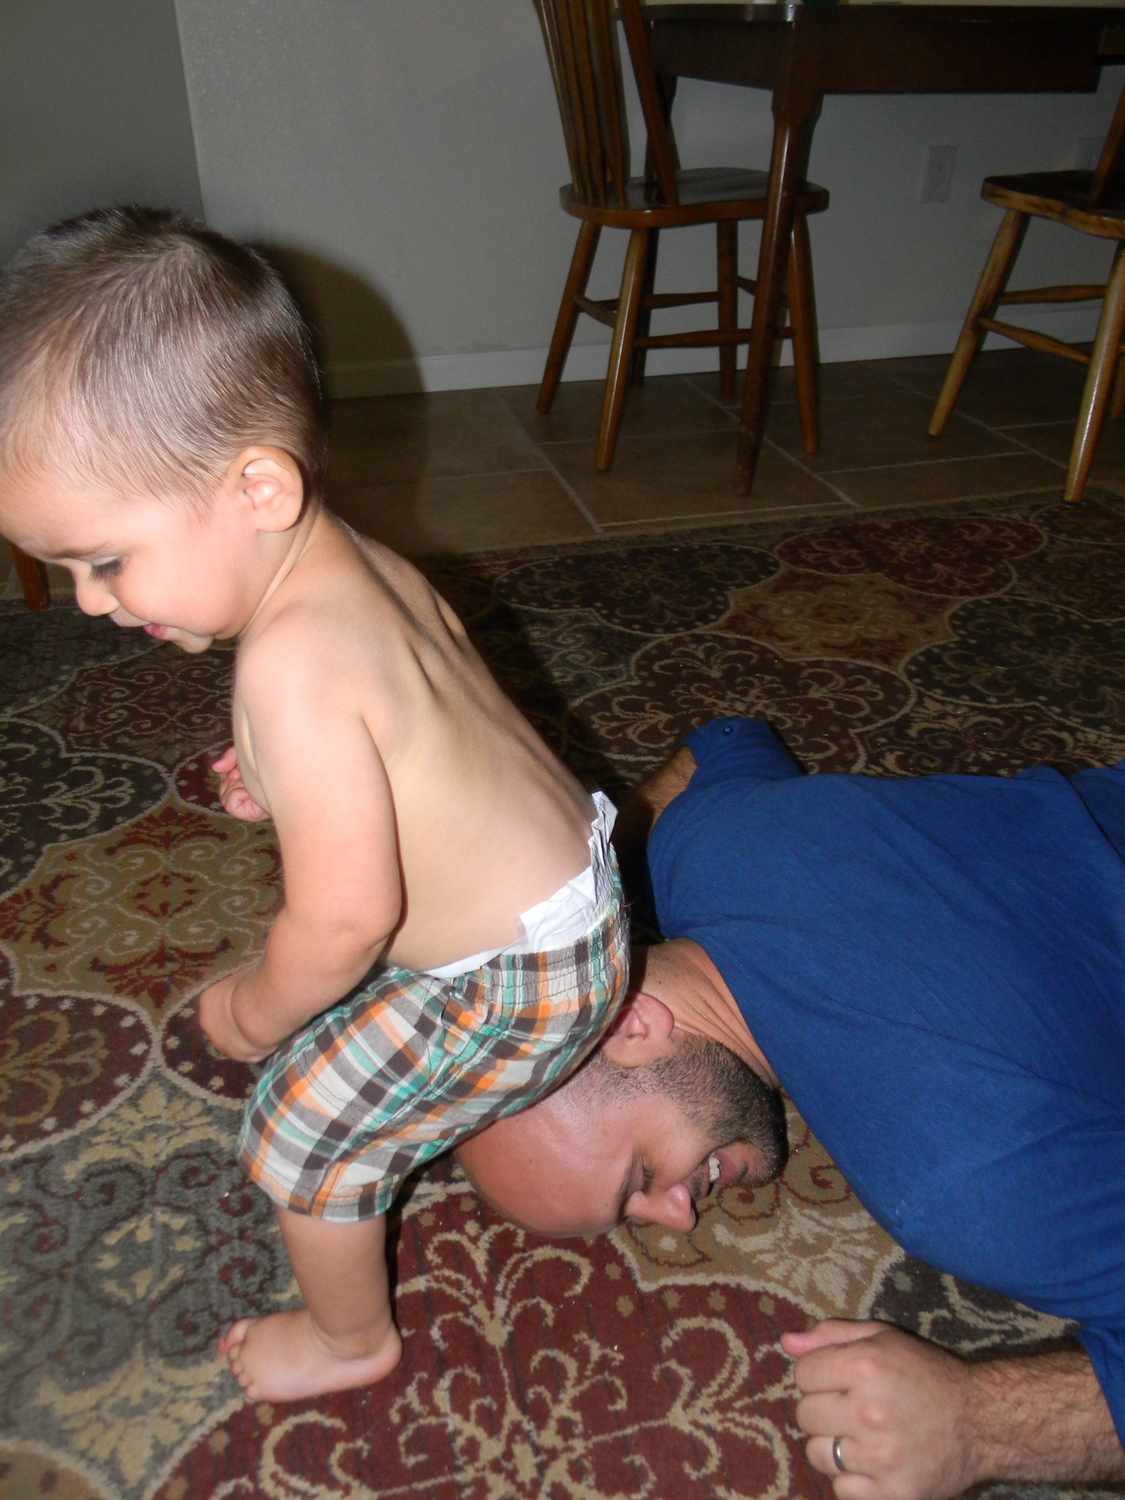 Father&son pic #2: Judah sitting on John's head, which, for some reason, he enjoys :)